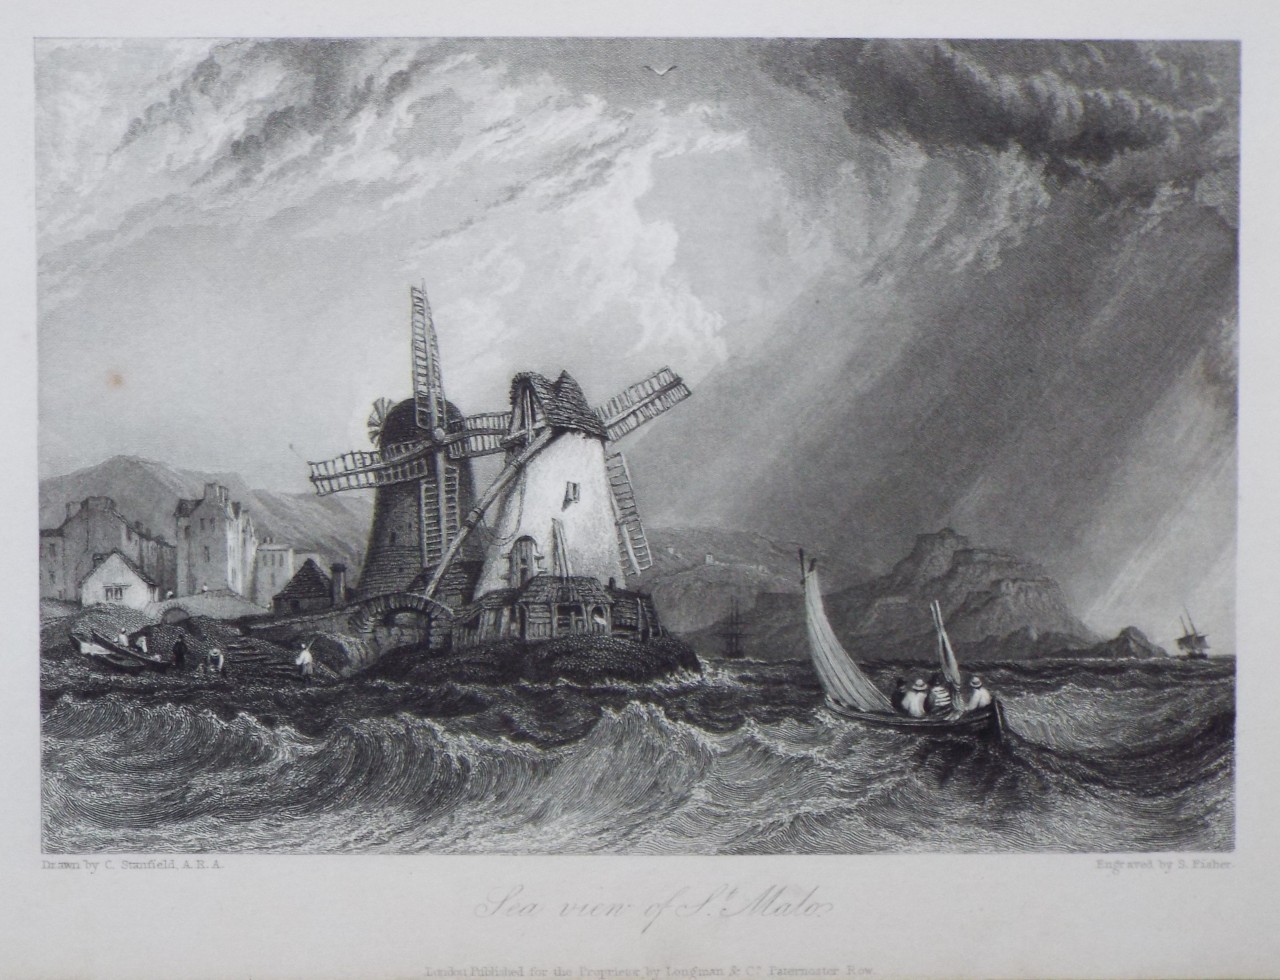 Print - Sea View of St. Malo. - Fisher